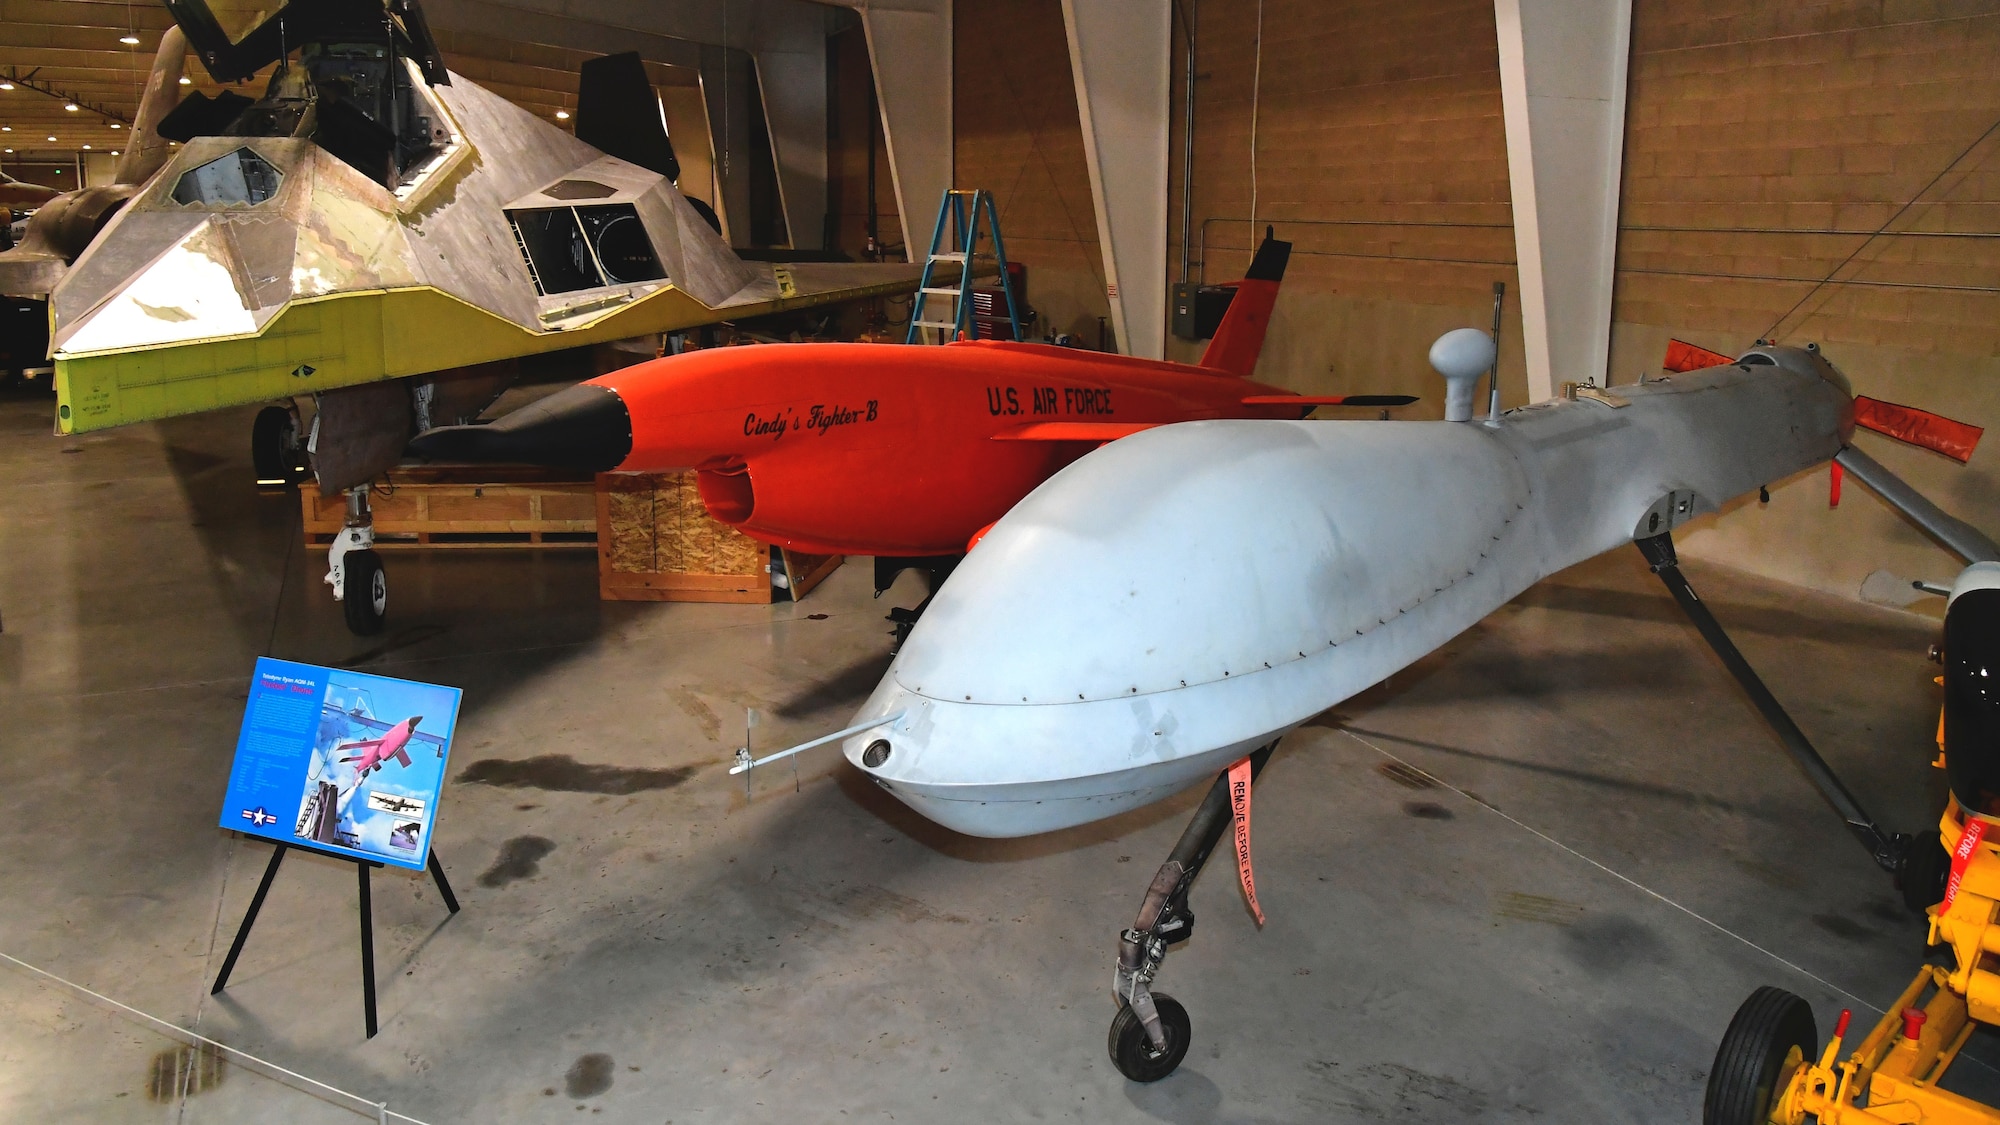 An MQ-1B Predator remotely piloted aircraft on display next to other aircraft in the Hill Aerospace Museum gallery.